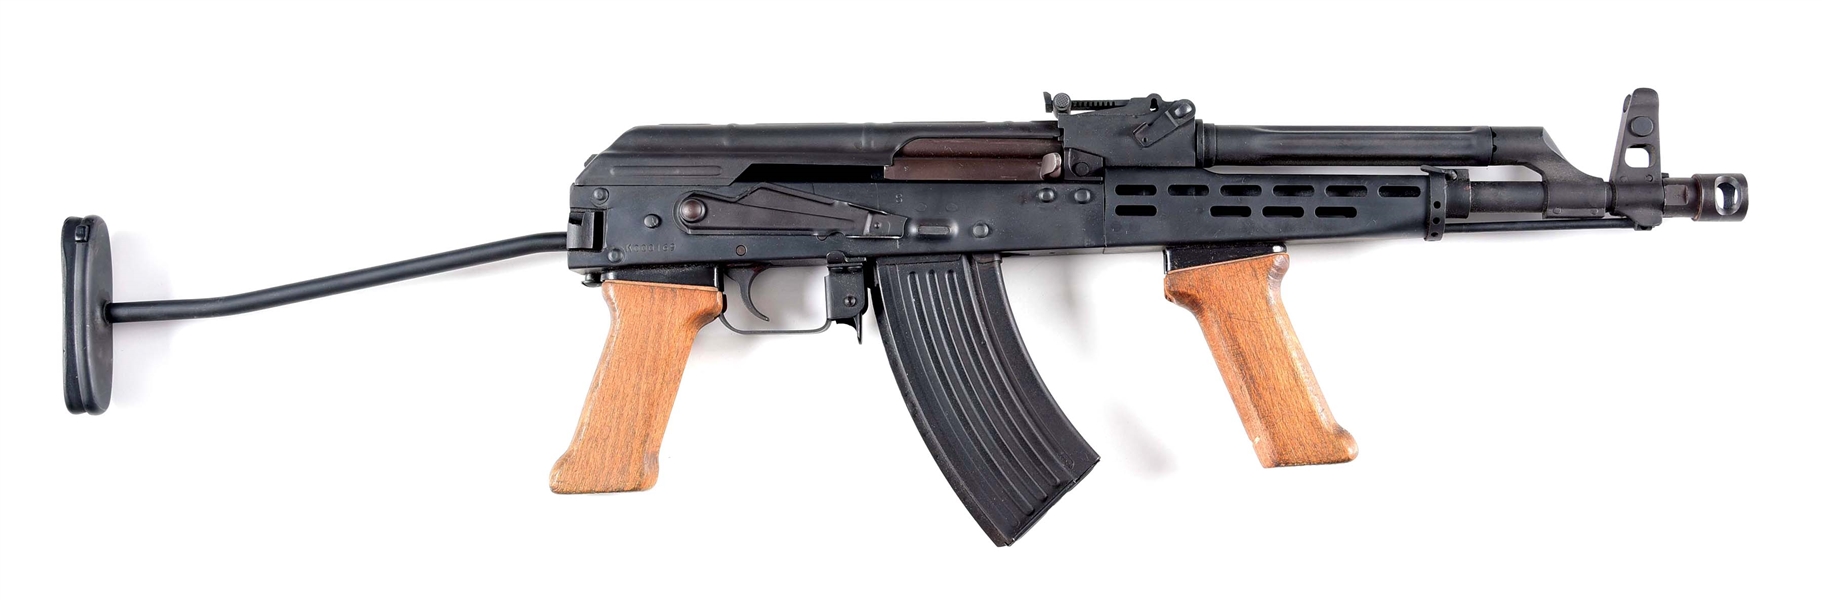 (N) VULCAN ARMS MODEL 47 SEMI-AUTOMATIC SBR MADE FROM A HUNGARIAN AMD-65 PARTS KIT (SHORT BARREL RIFLE).